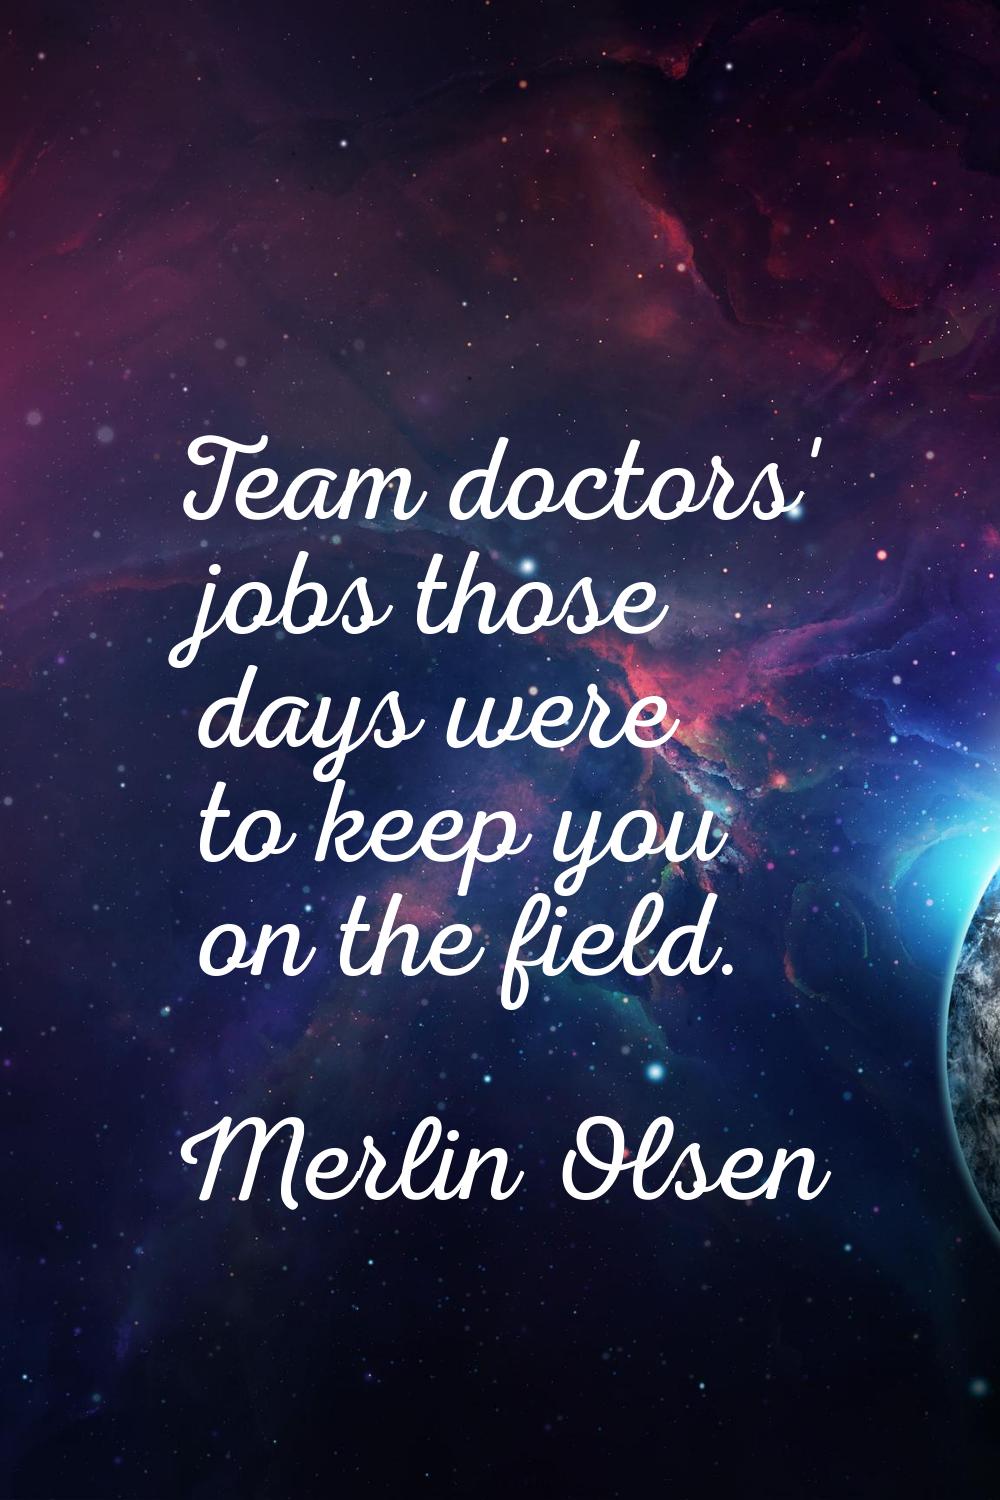 Team doctors' jobs those days were to keep you on the field.